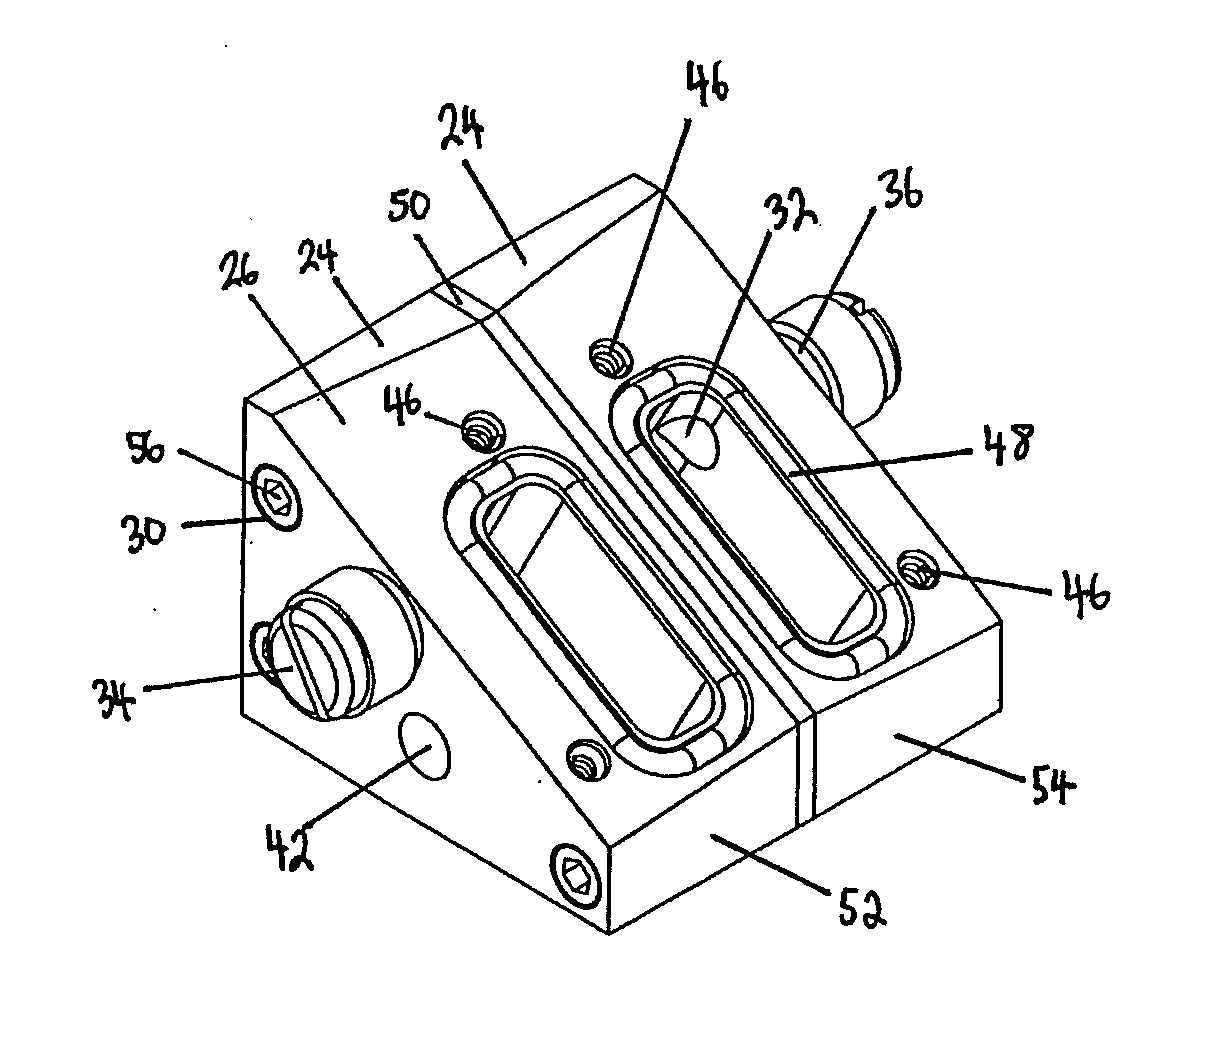 Apparatus and method for non-destructive testing using ultrasonic phased array